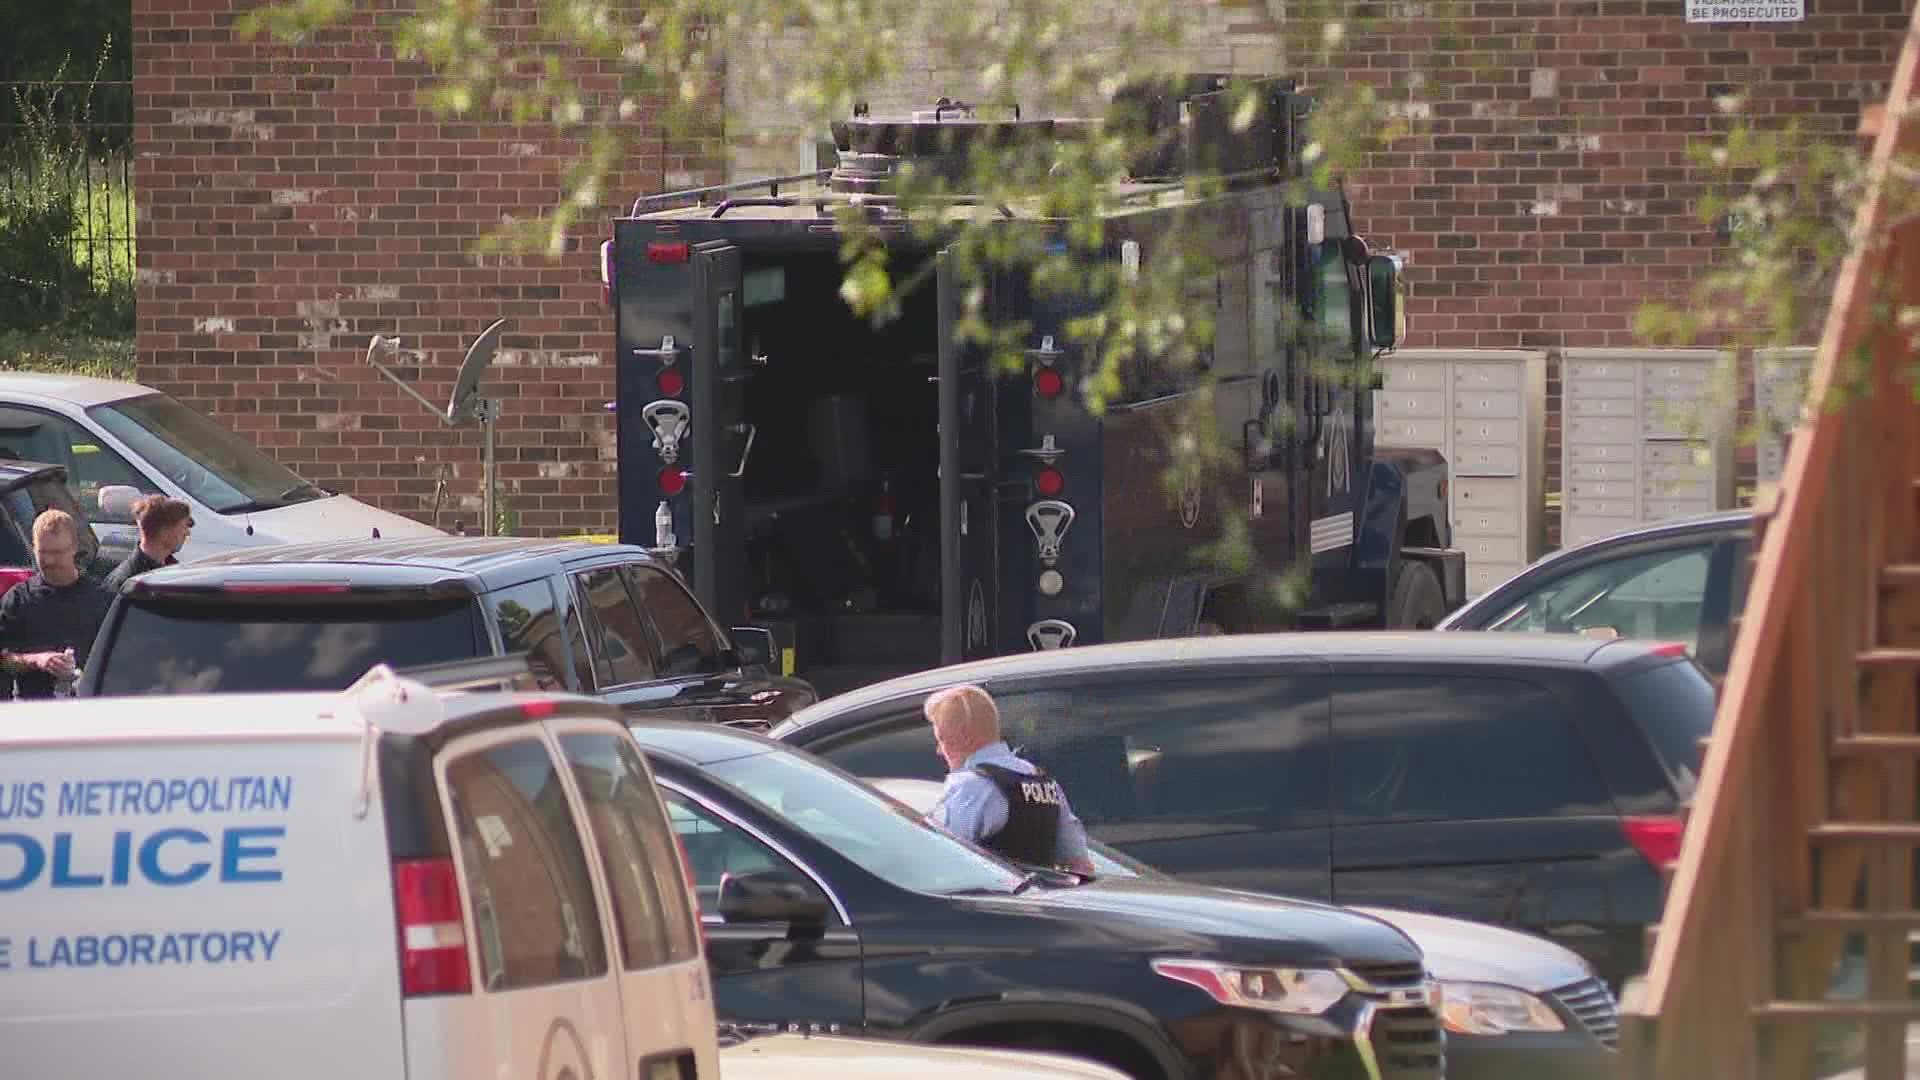 "He refused to come out and barricaded himself in the apartment," said Lieutenant John Green.